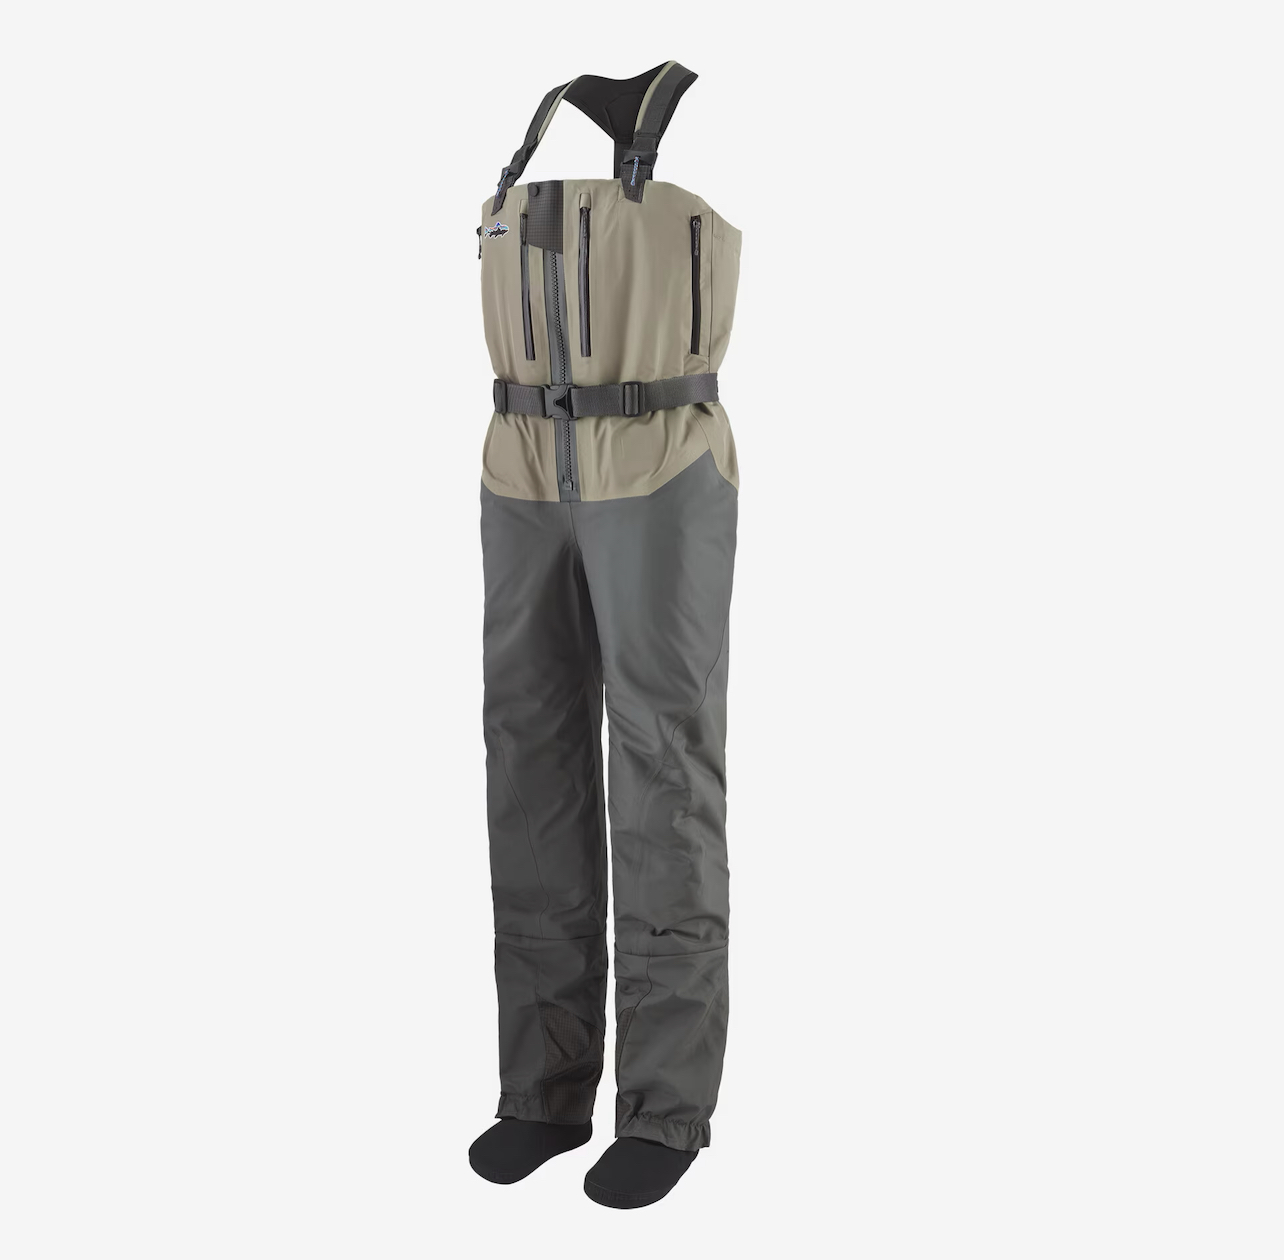 Patagonia W's Swiftcurrent Expedition Zip-Front Waders - XSS